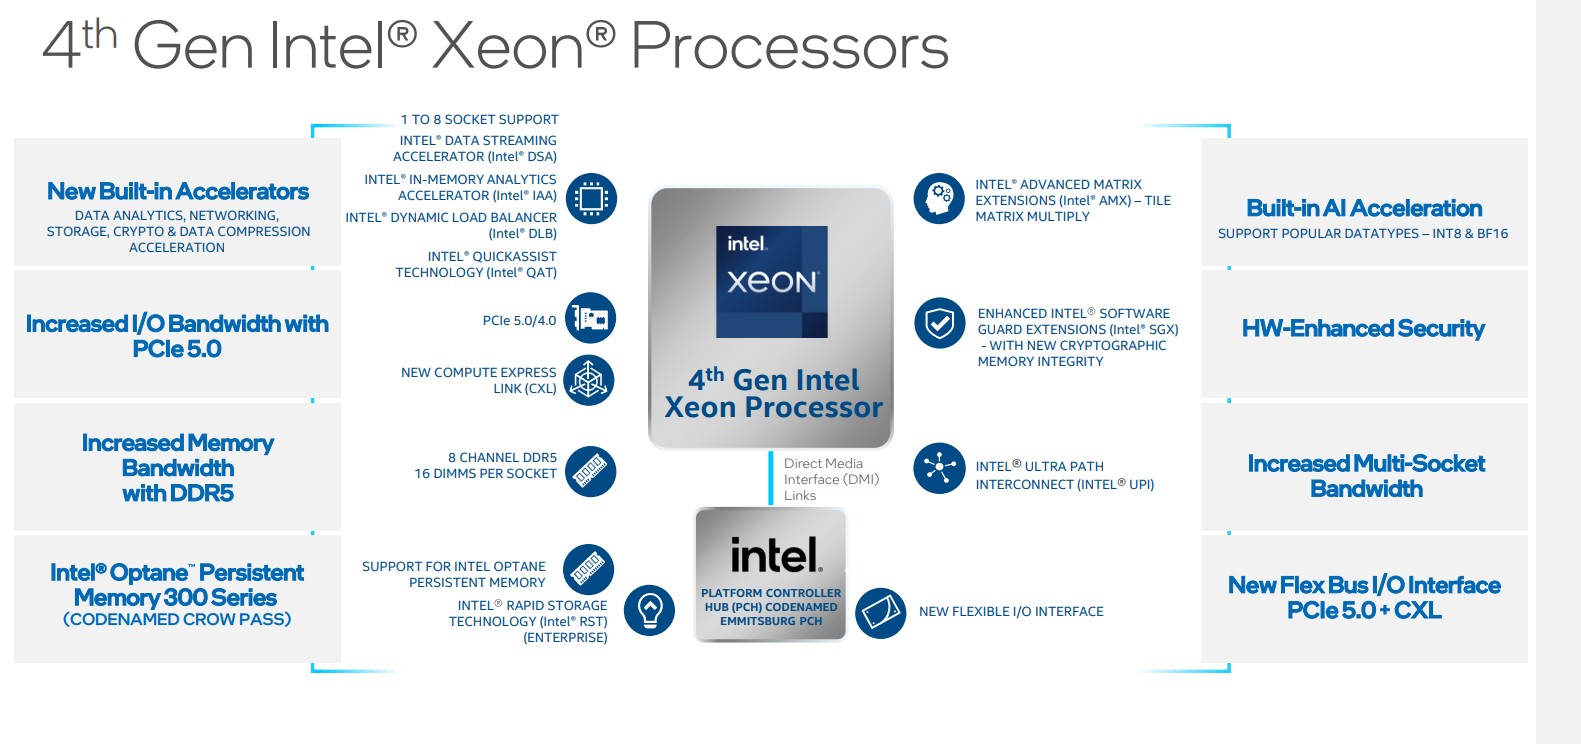 4th Generation Intel Xeon Scalable Sapphire Rapids Platform Overview